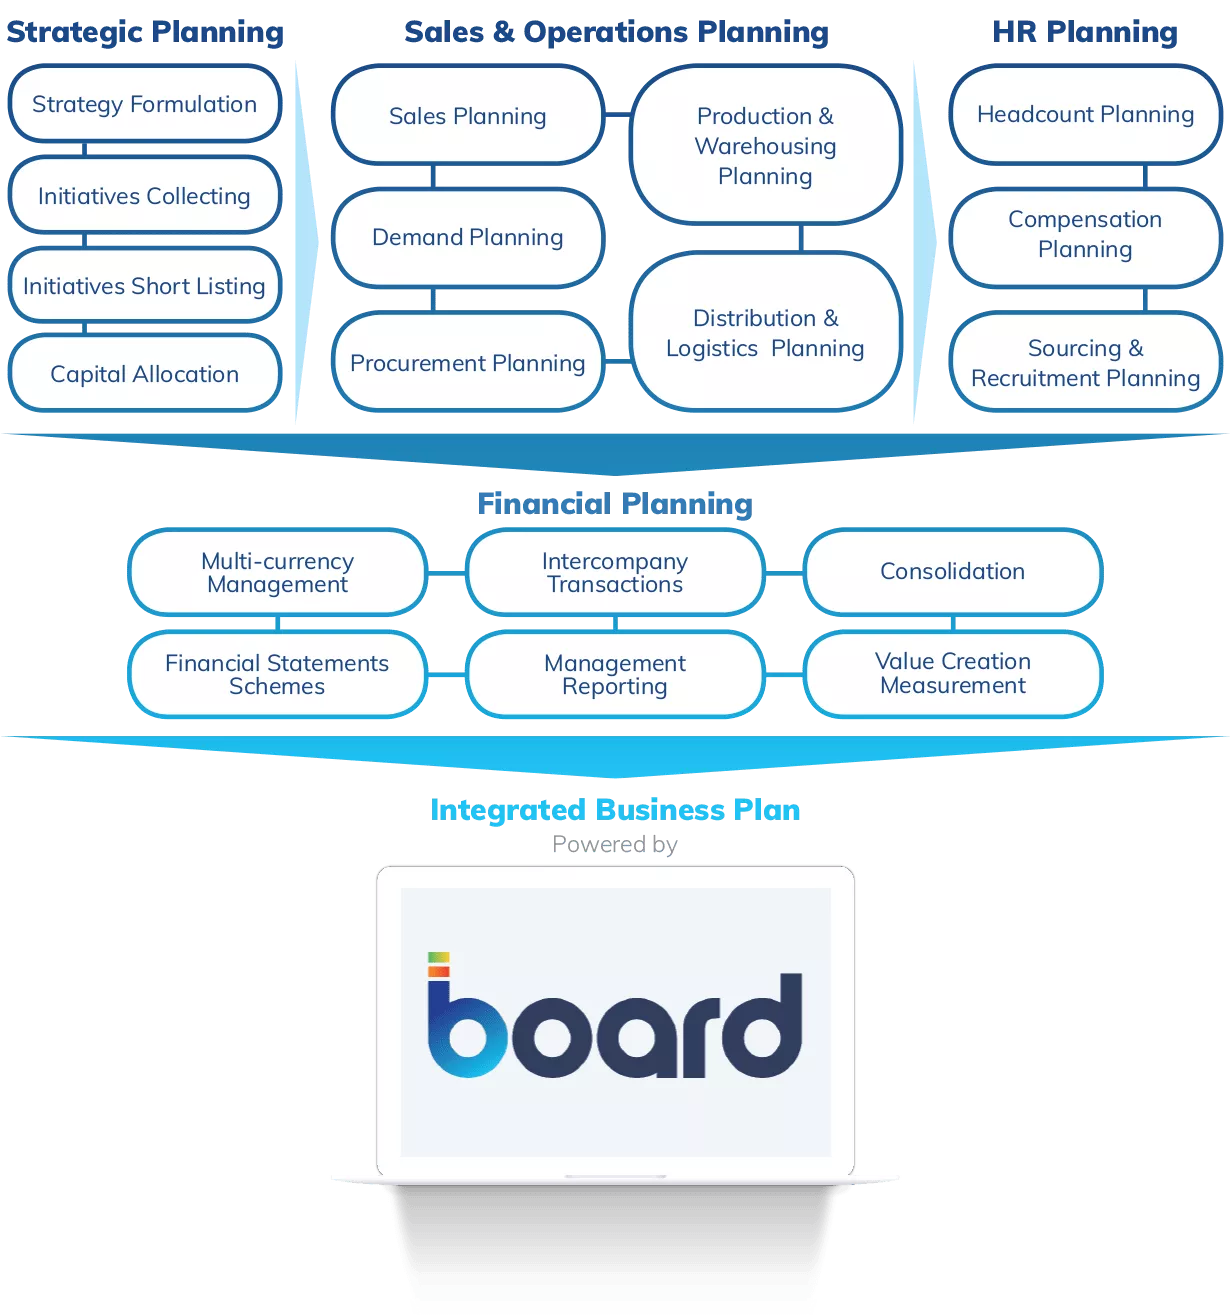 The benefits of Integrated Business Planning with Board